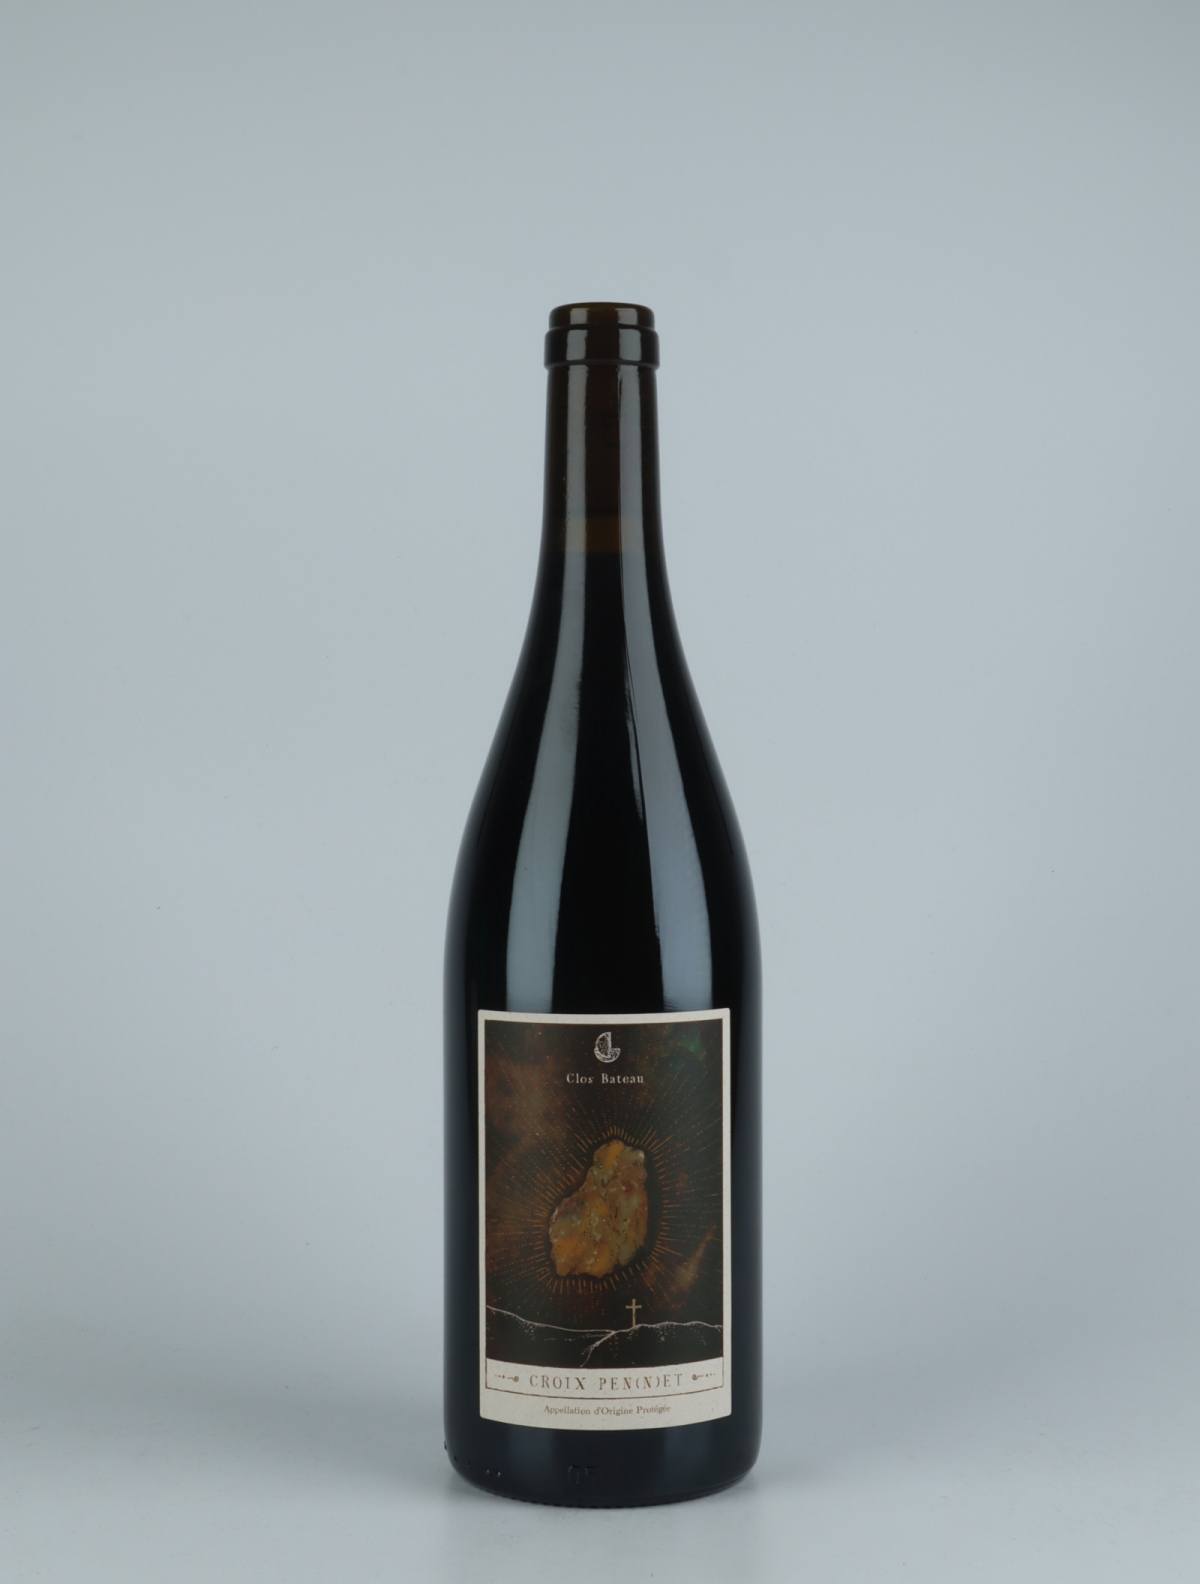 A bottle 2020 Croix Pennet Red wine from Clos Bateau, Beaujolais in France